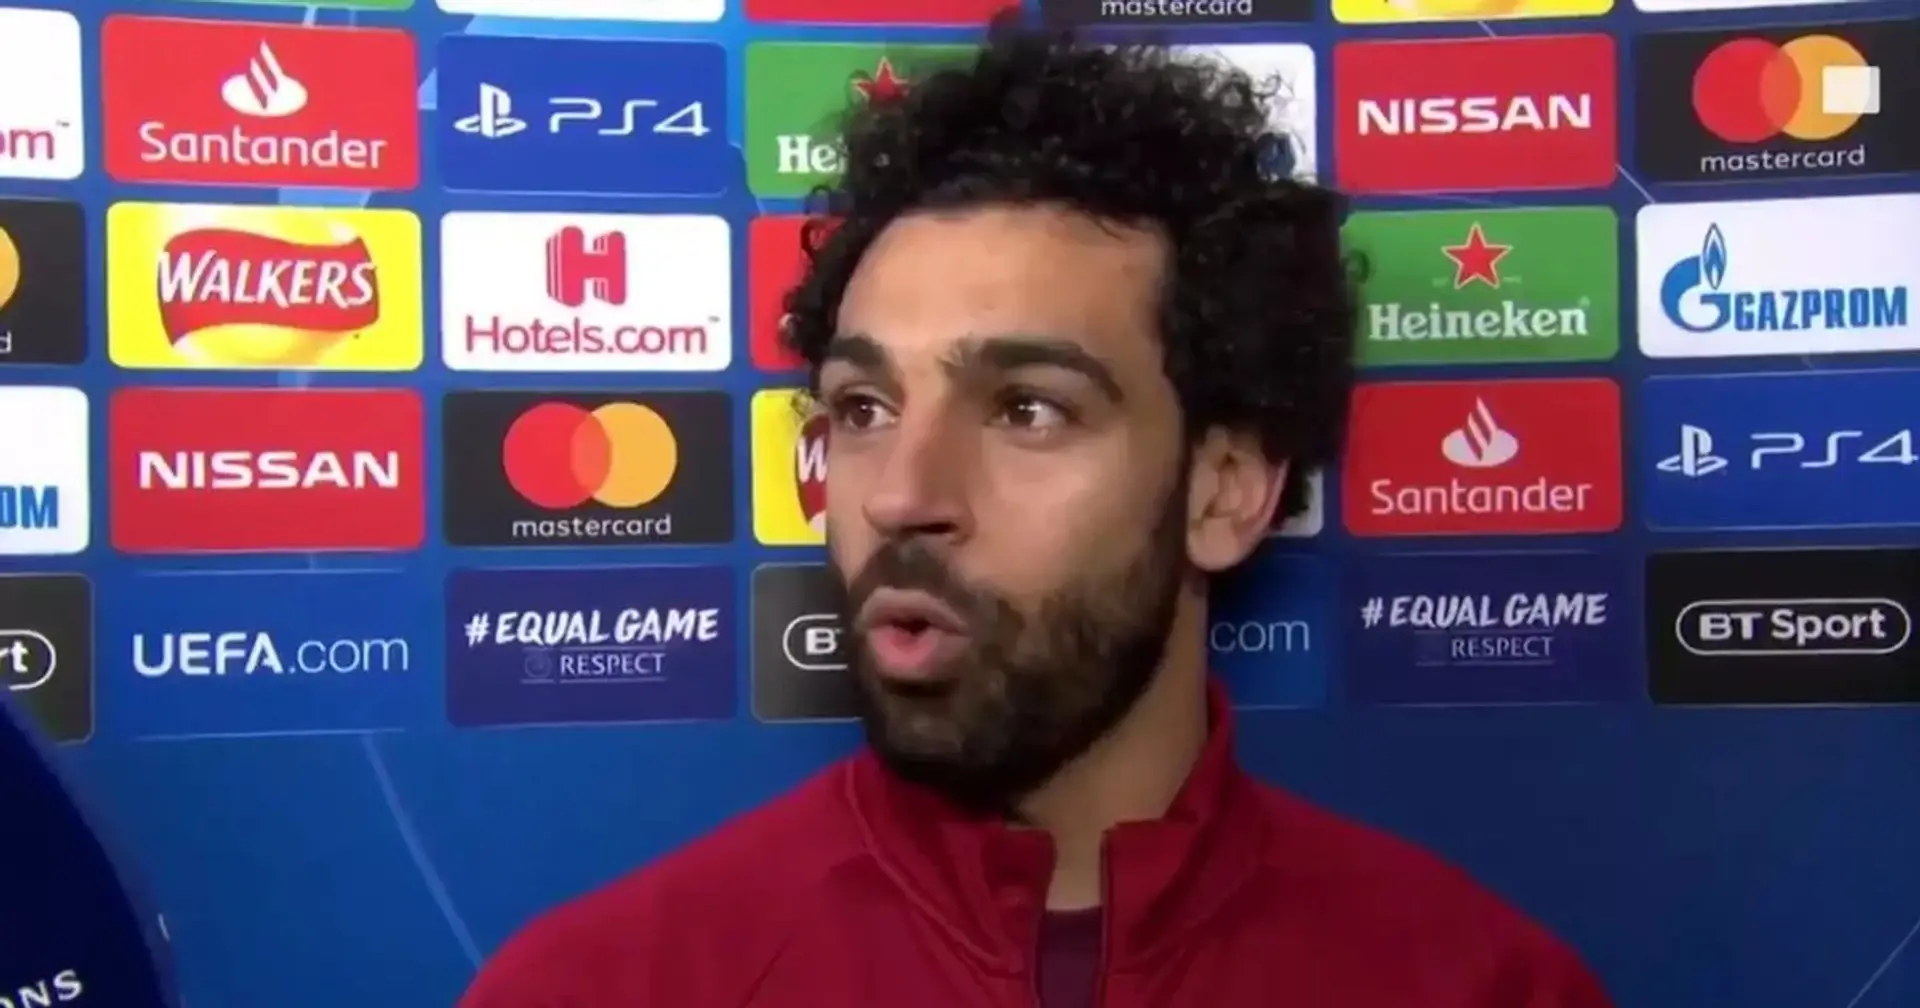 Mo Salah reveals if his stance on future at Liverpool changes after Jurgen Klopp exit